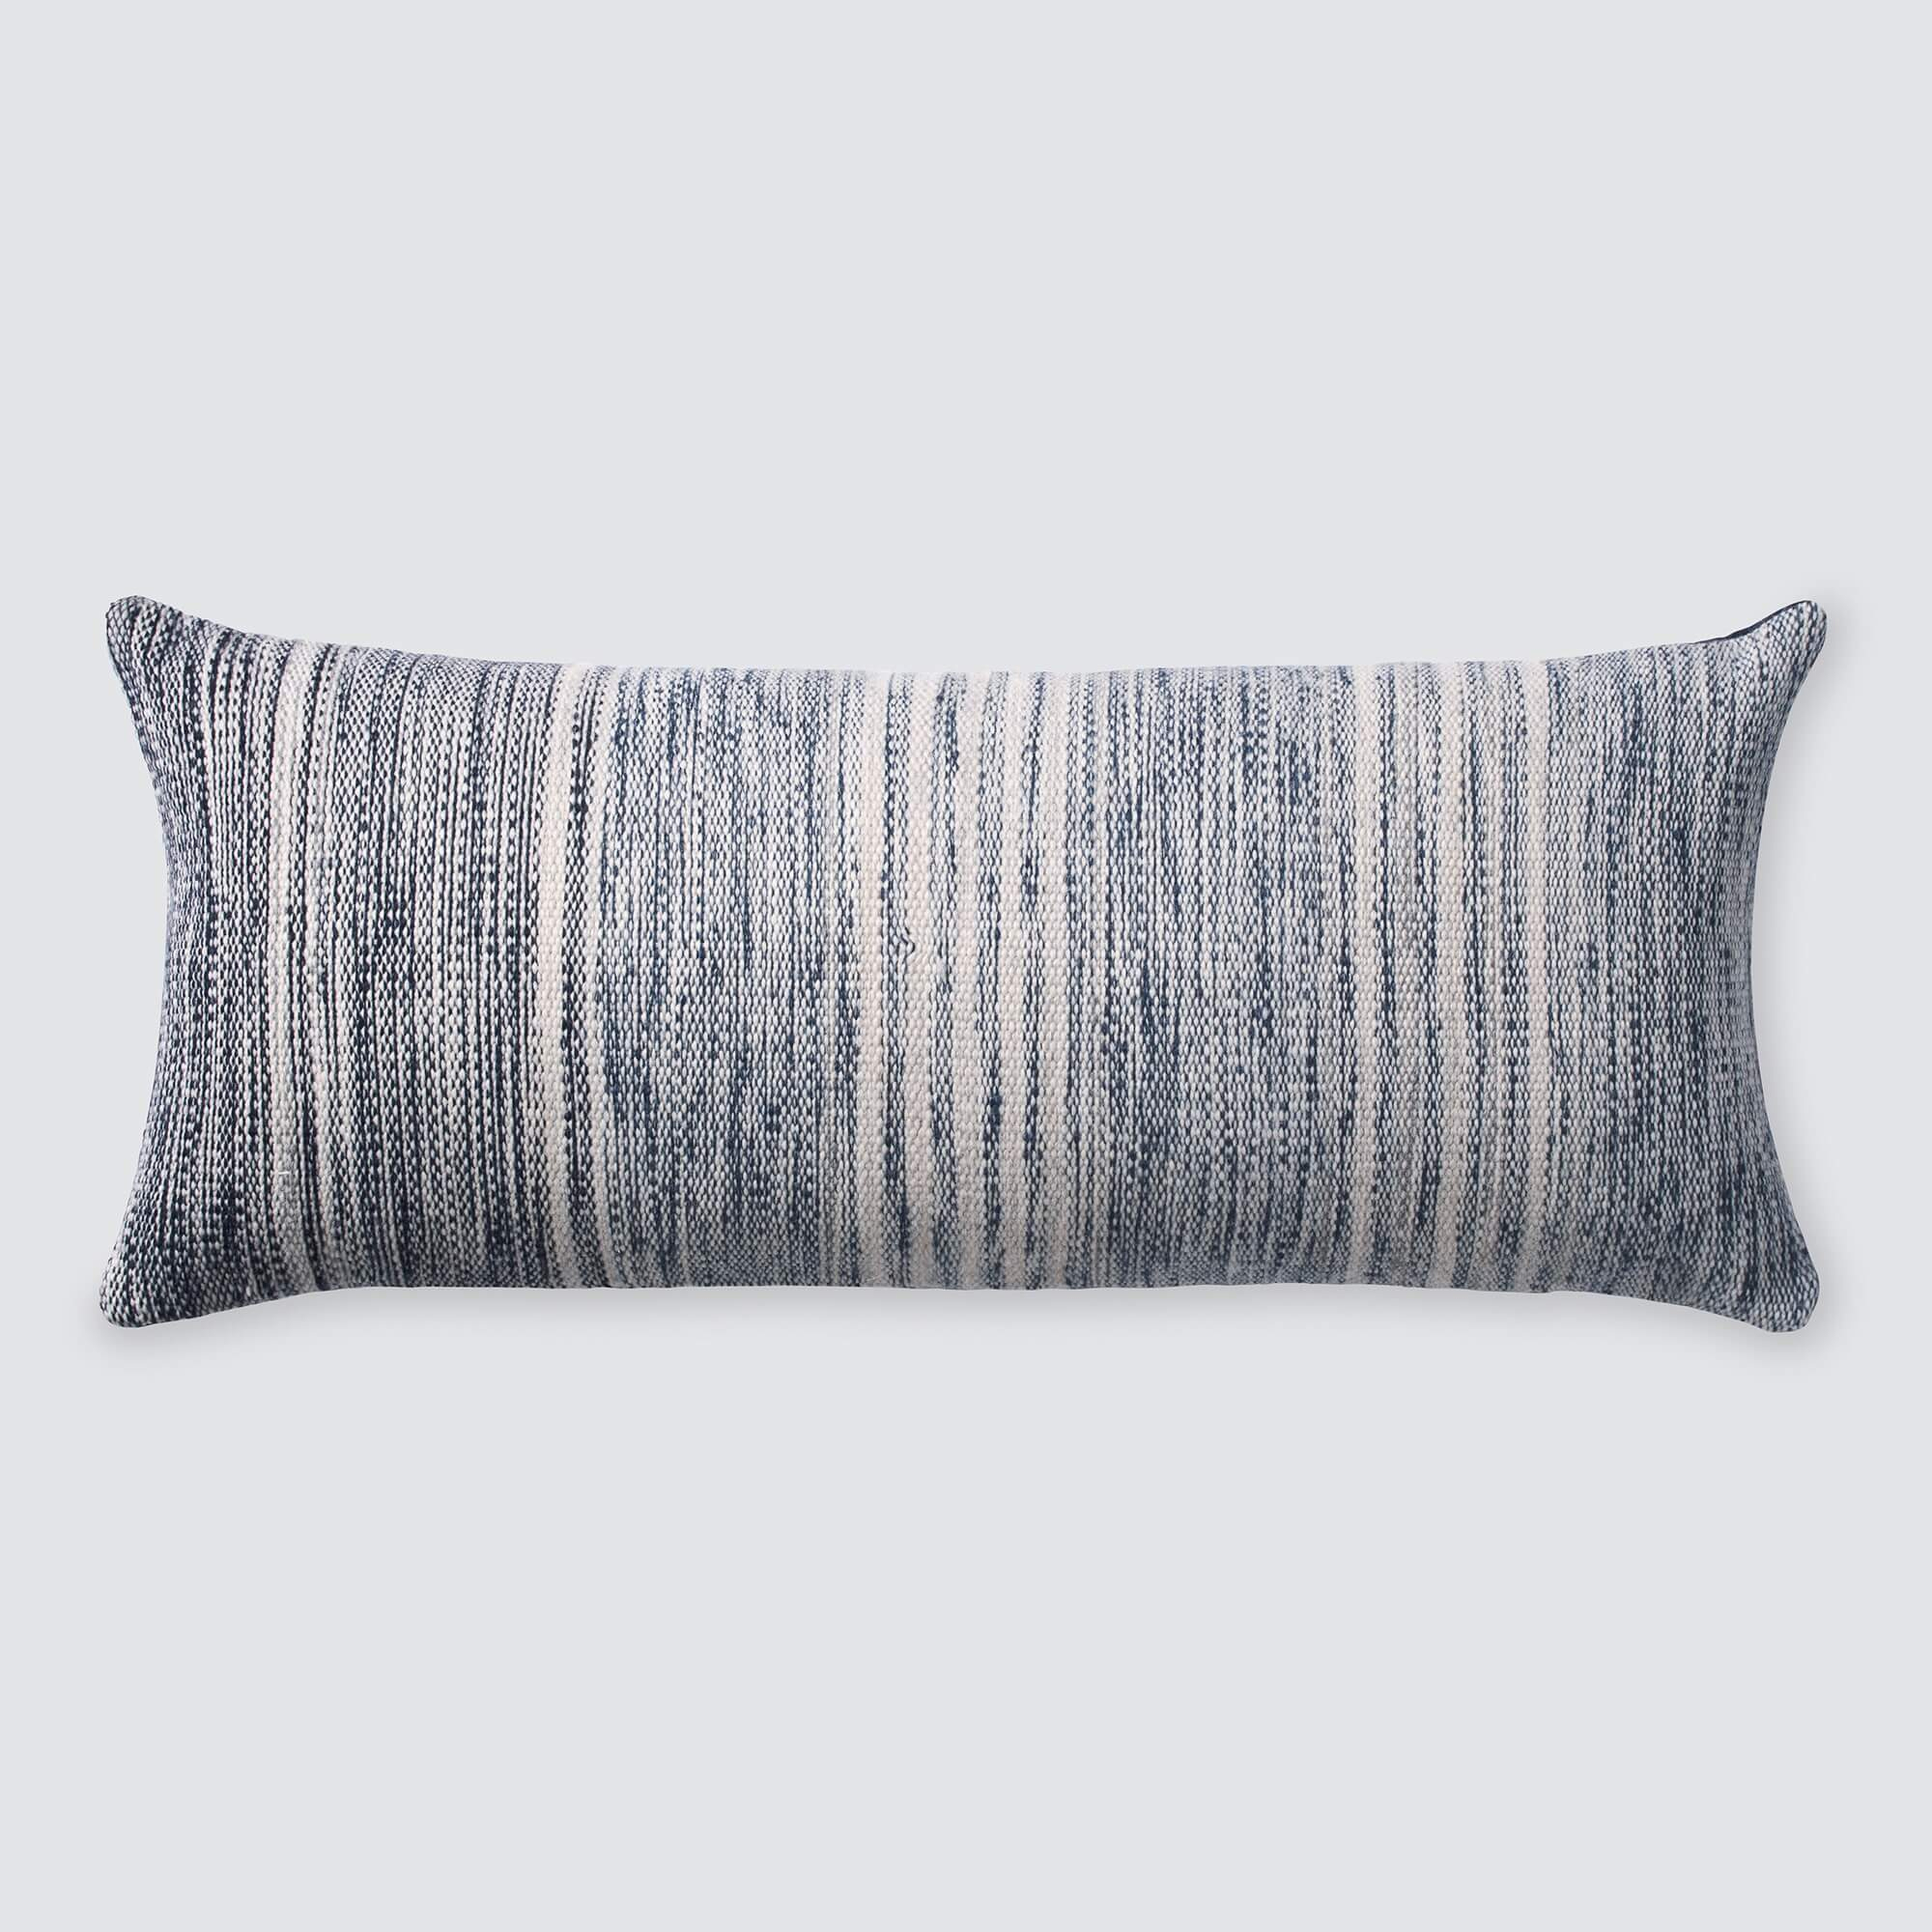 Lorena Lumbar Pillow By The Citizenry - The Citizenry